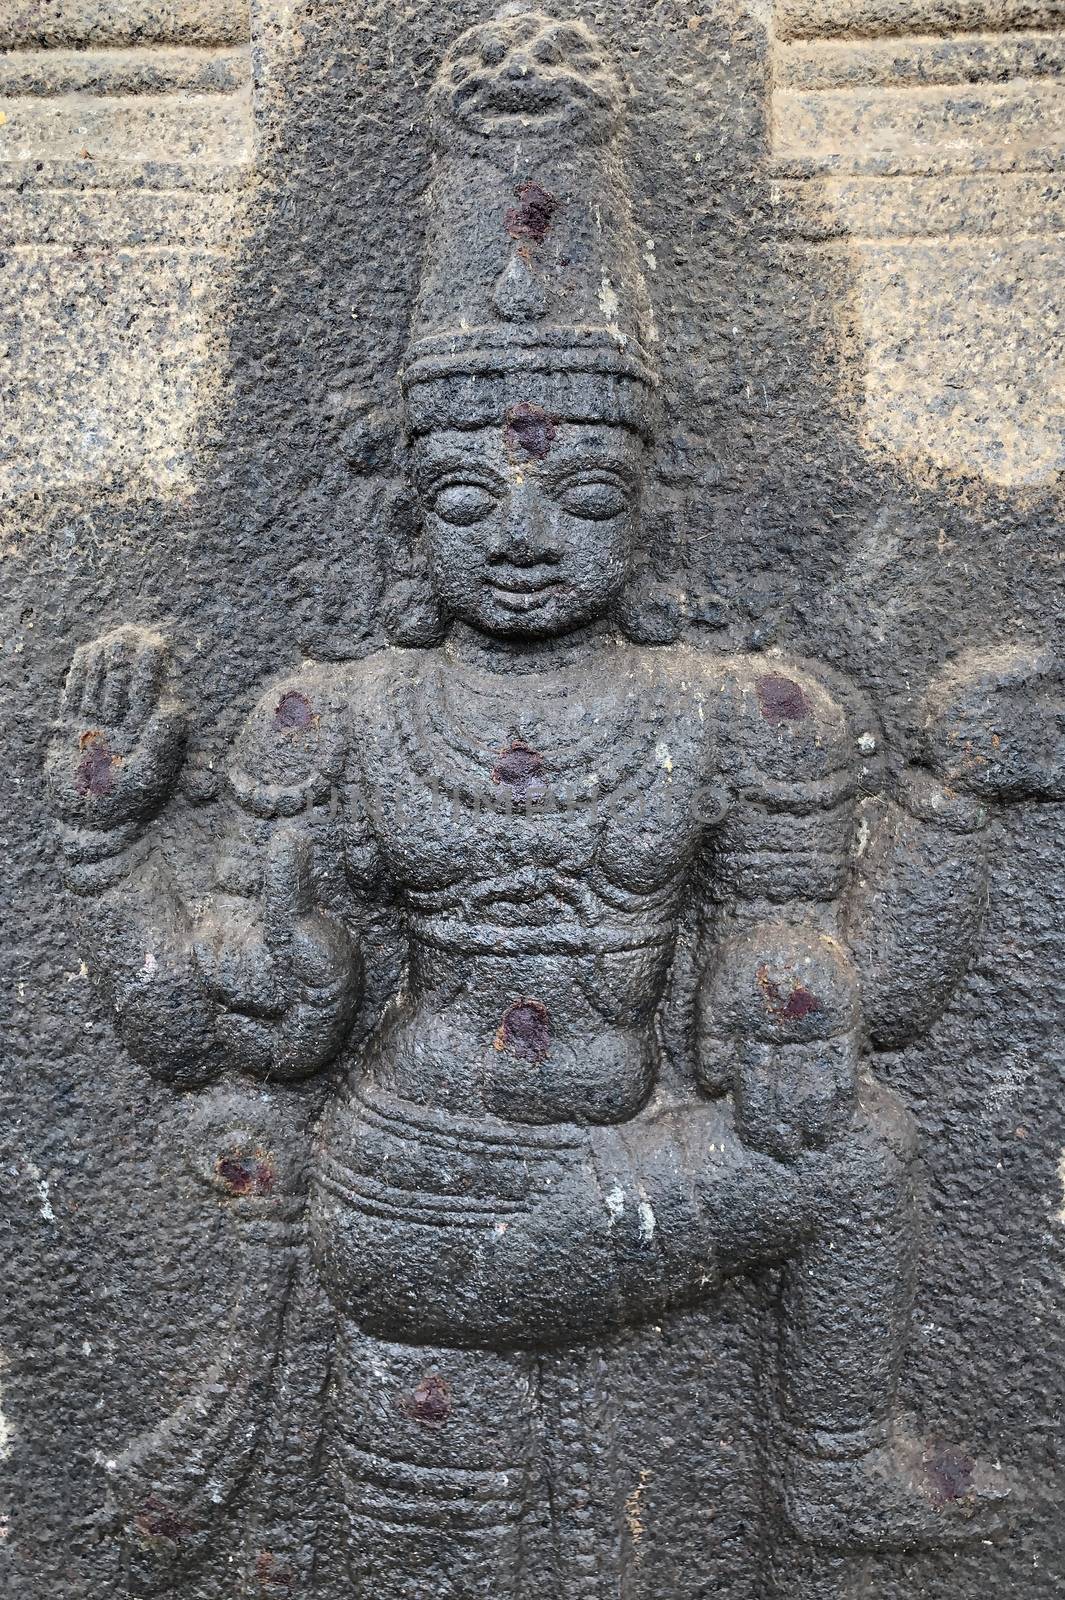 Bas relief sculpture oh God carved in the stone walls of Shiva temple, Tamil nadu by prabhakaran851